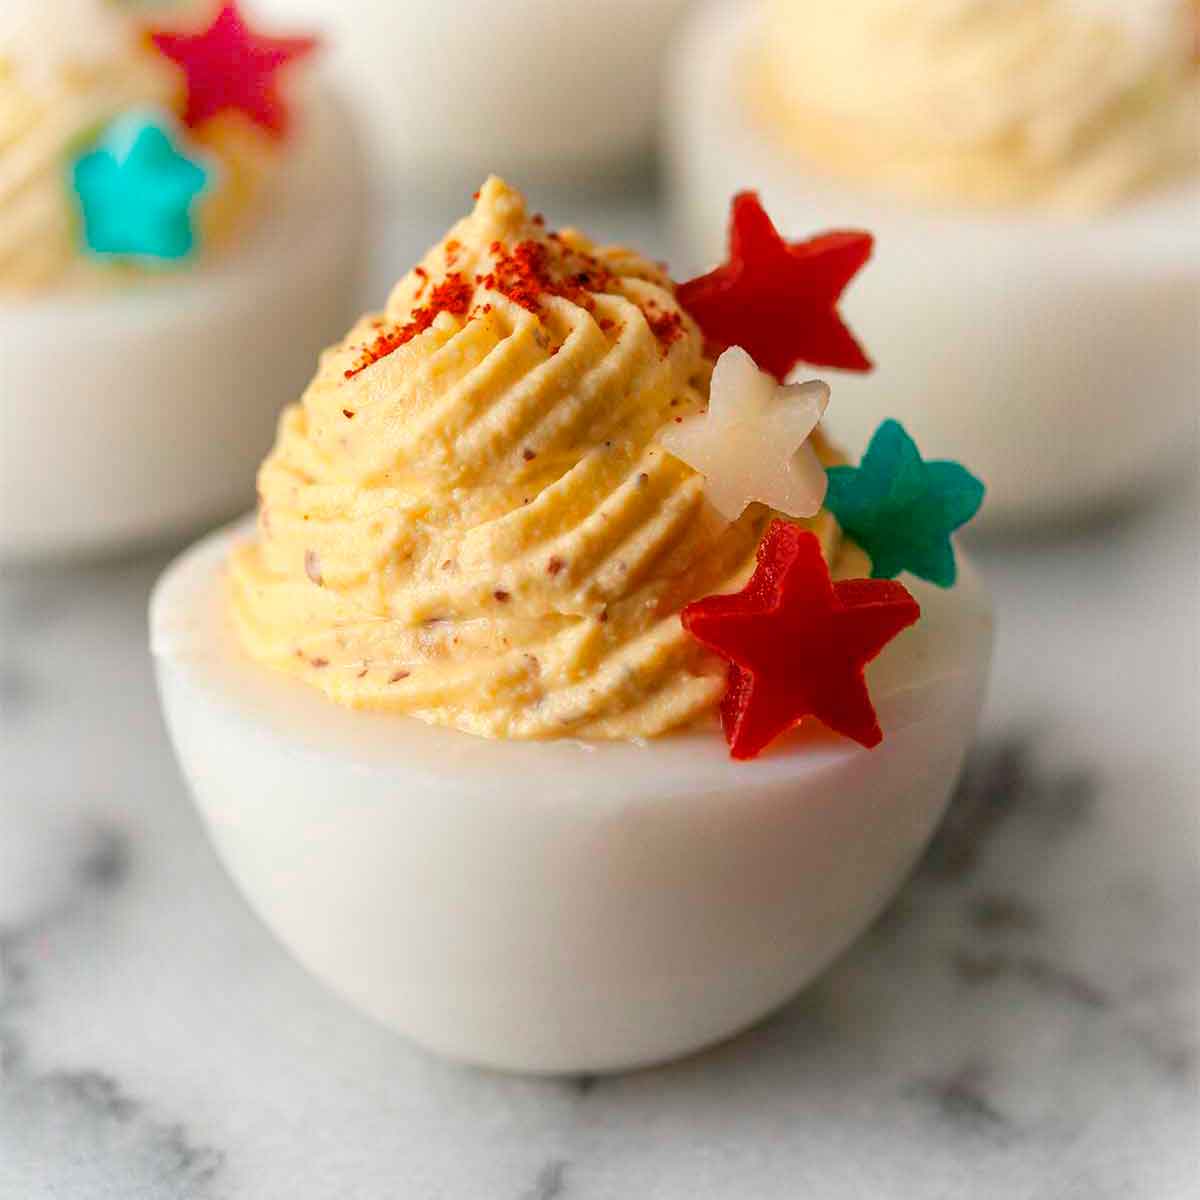 A deviled egg on marble, garnished with 4 stars made of red peppers and cheese that's both blue and white.